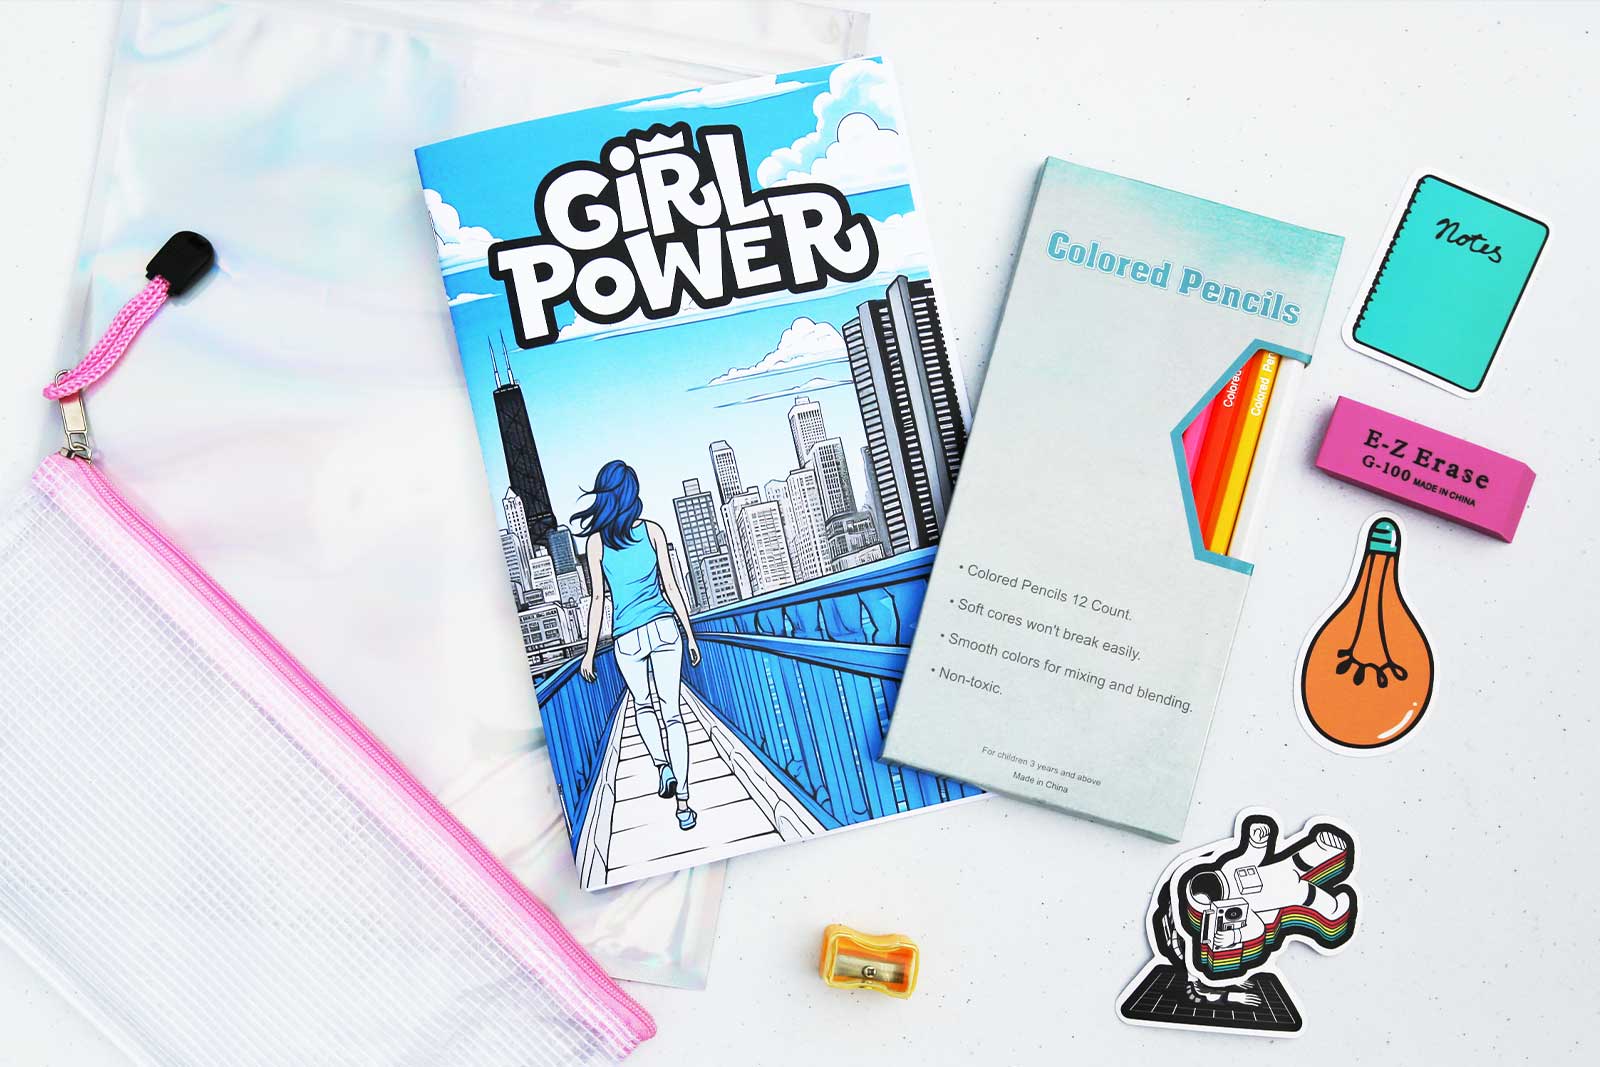 Coloring book kit including: pencil case, coloring book, colored pencils, eraser, sharpener, and STEM stickers